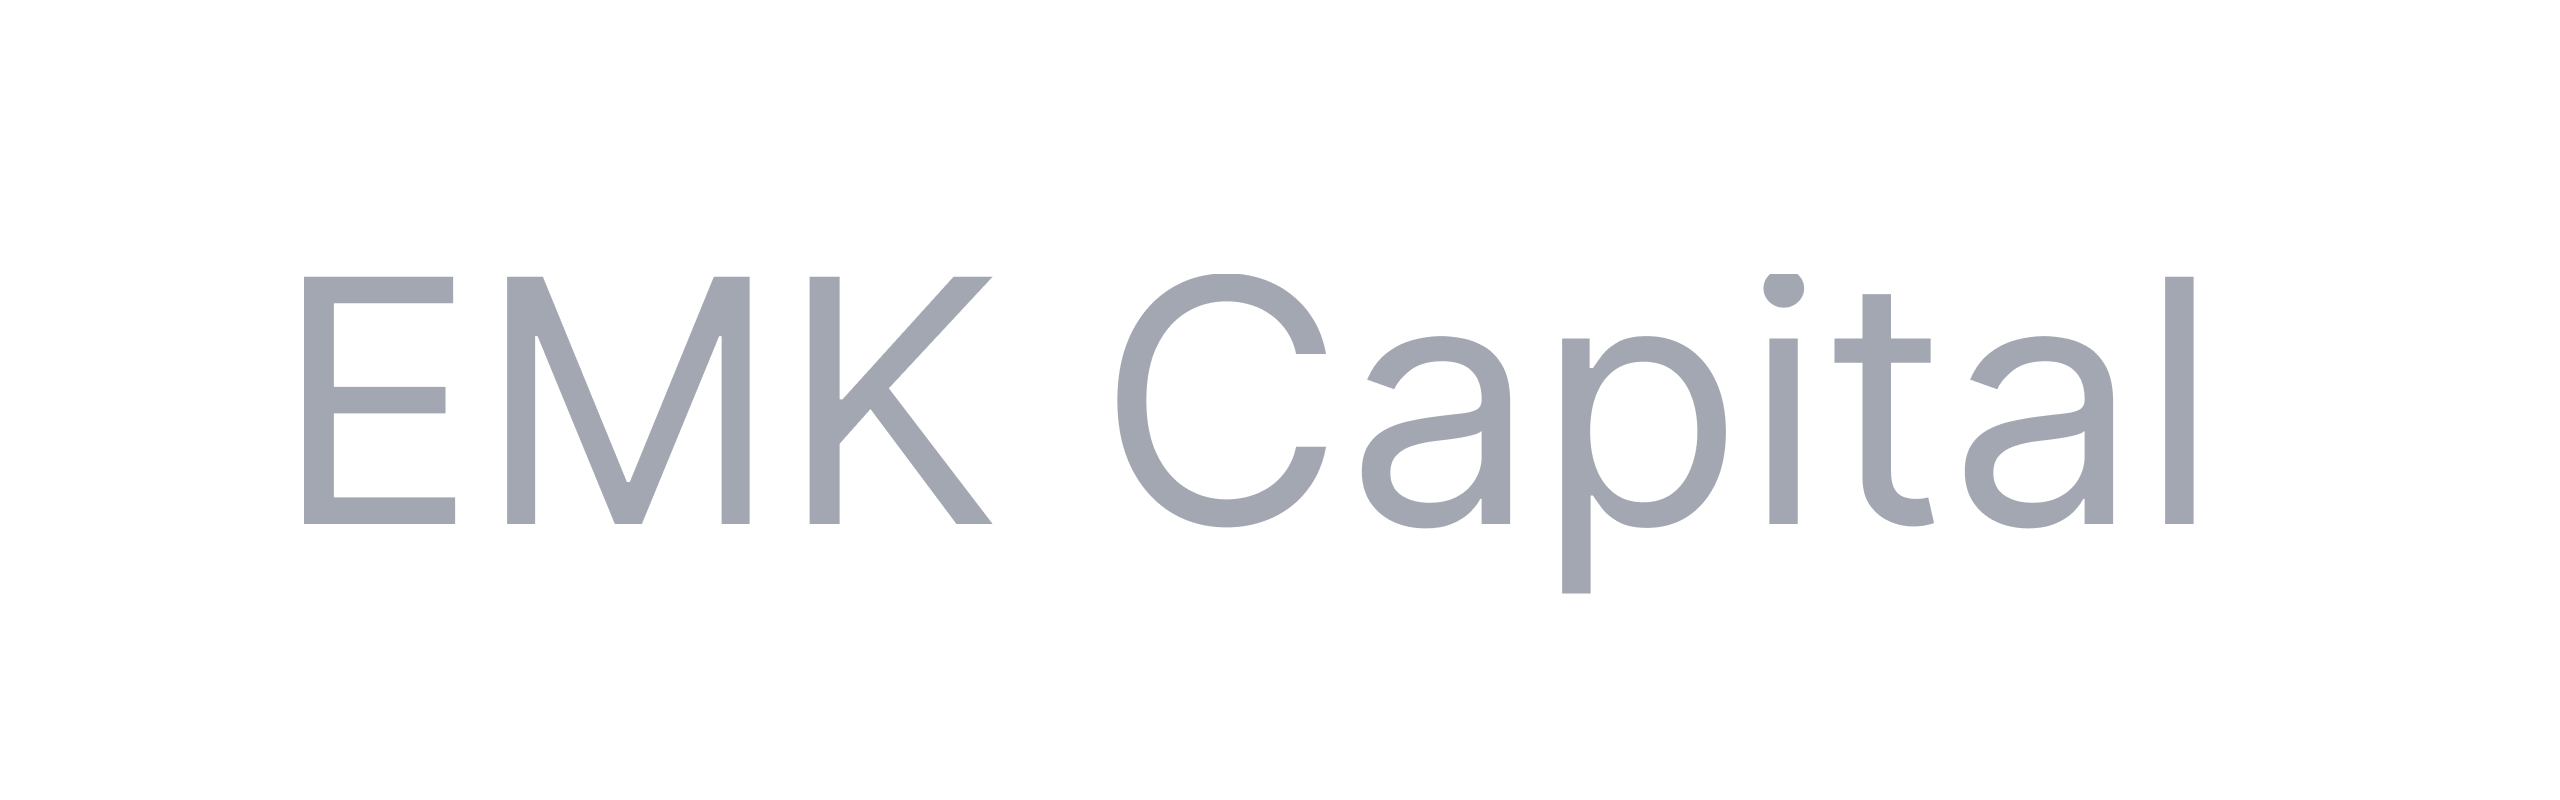 Technology & product due diligence | Code & Co. advises EMK Capital (logo shown)